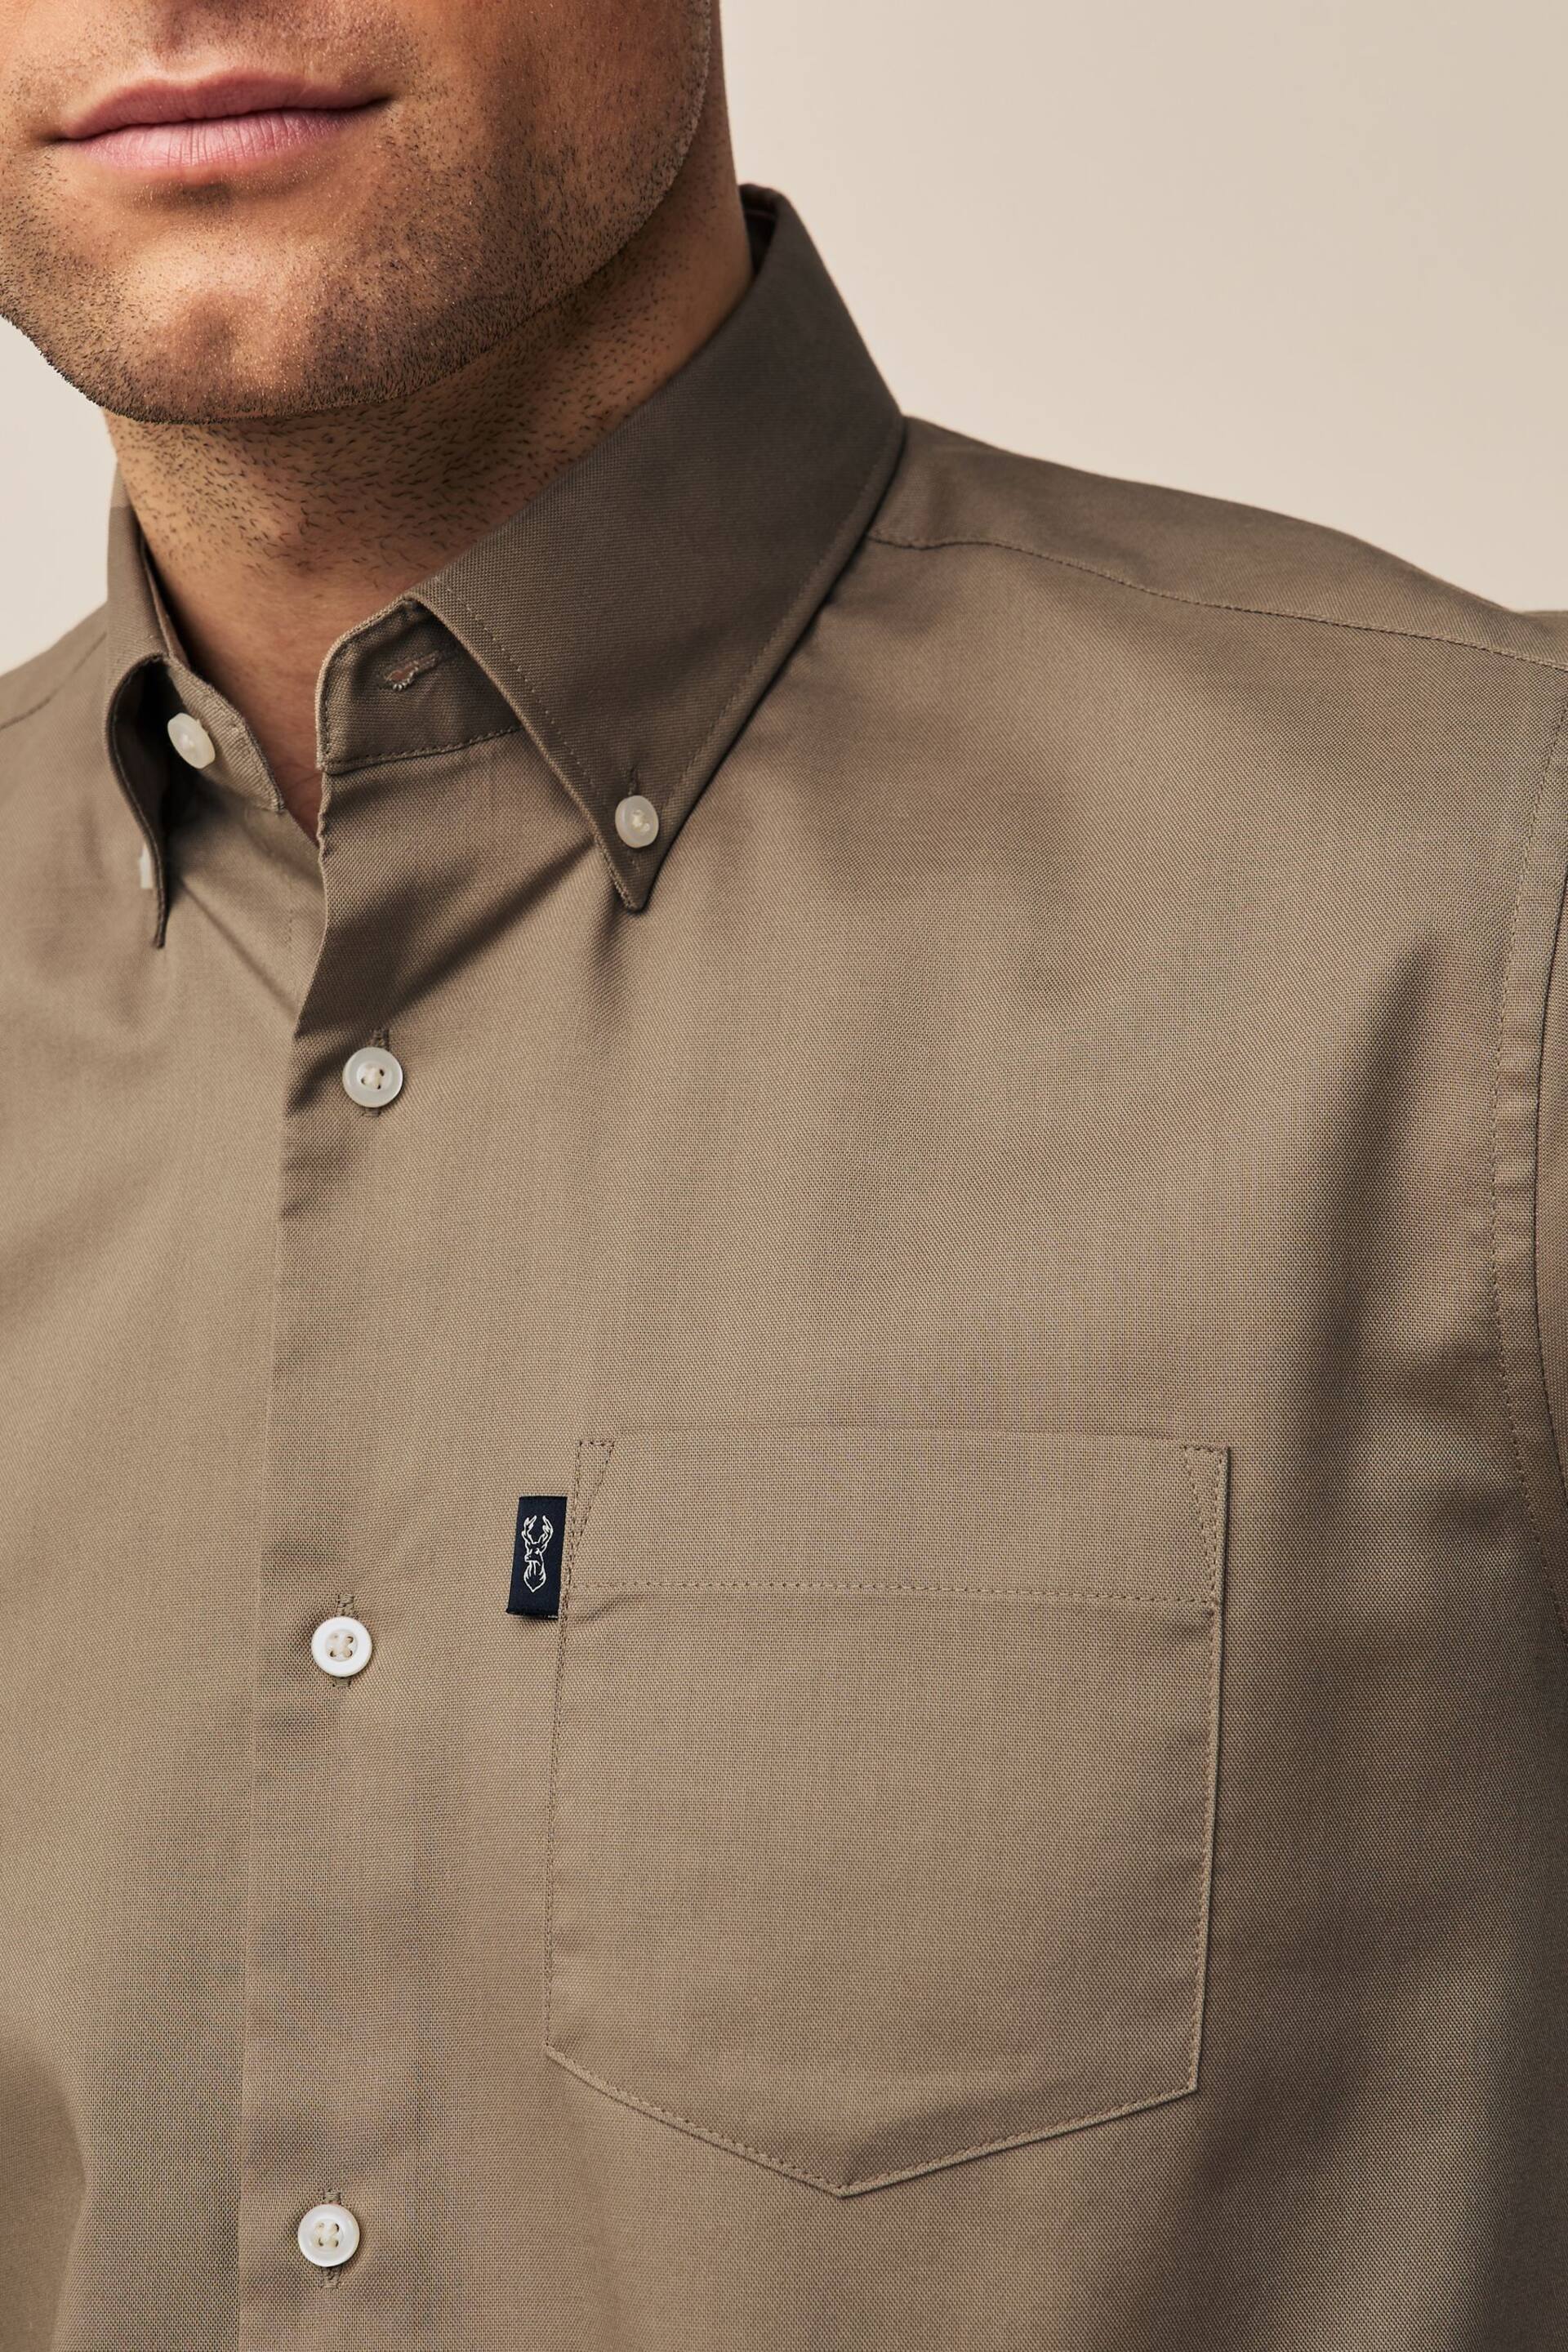 Neutral Brown Regular Fit Easy Iron Button Down Oxford Shirt - Image 5 of 9